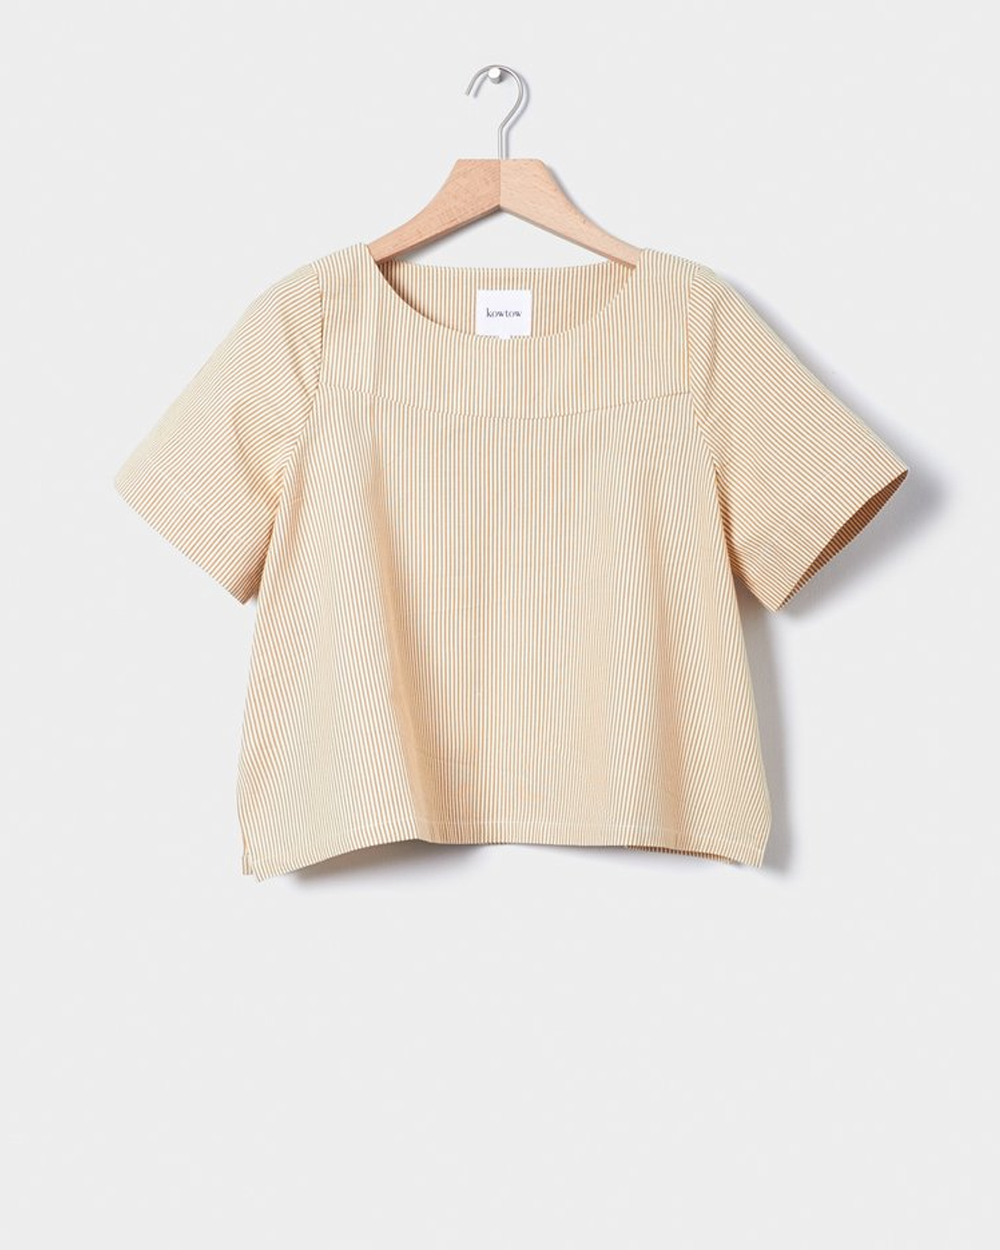 Tidal top, ,$169 from Kowtow